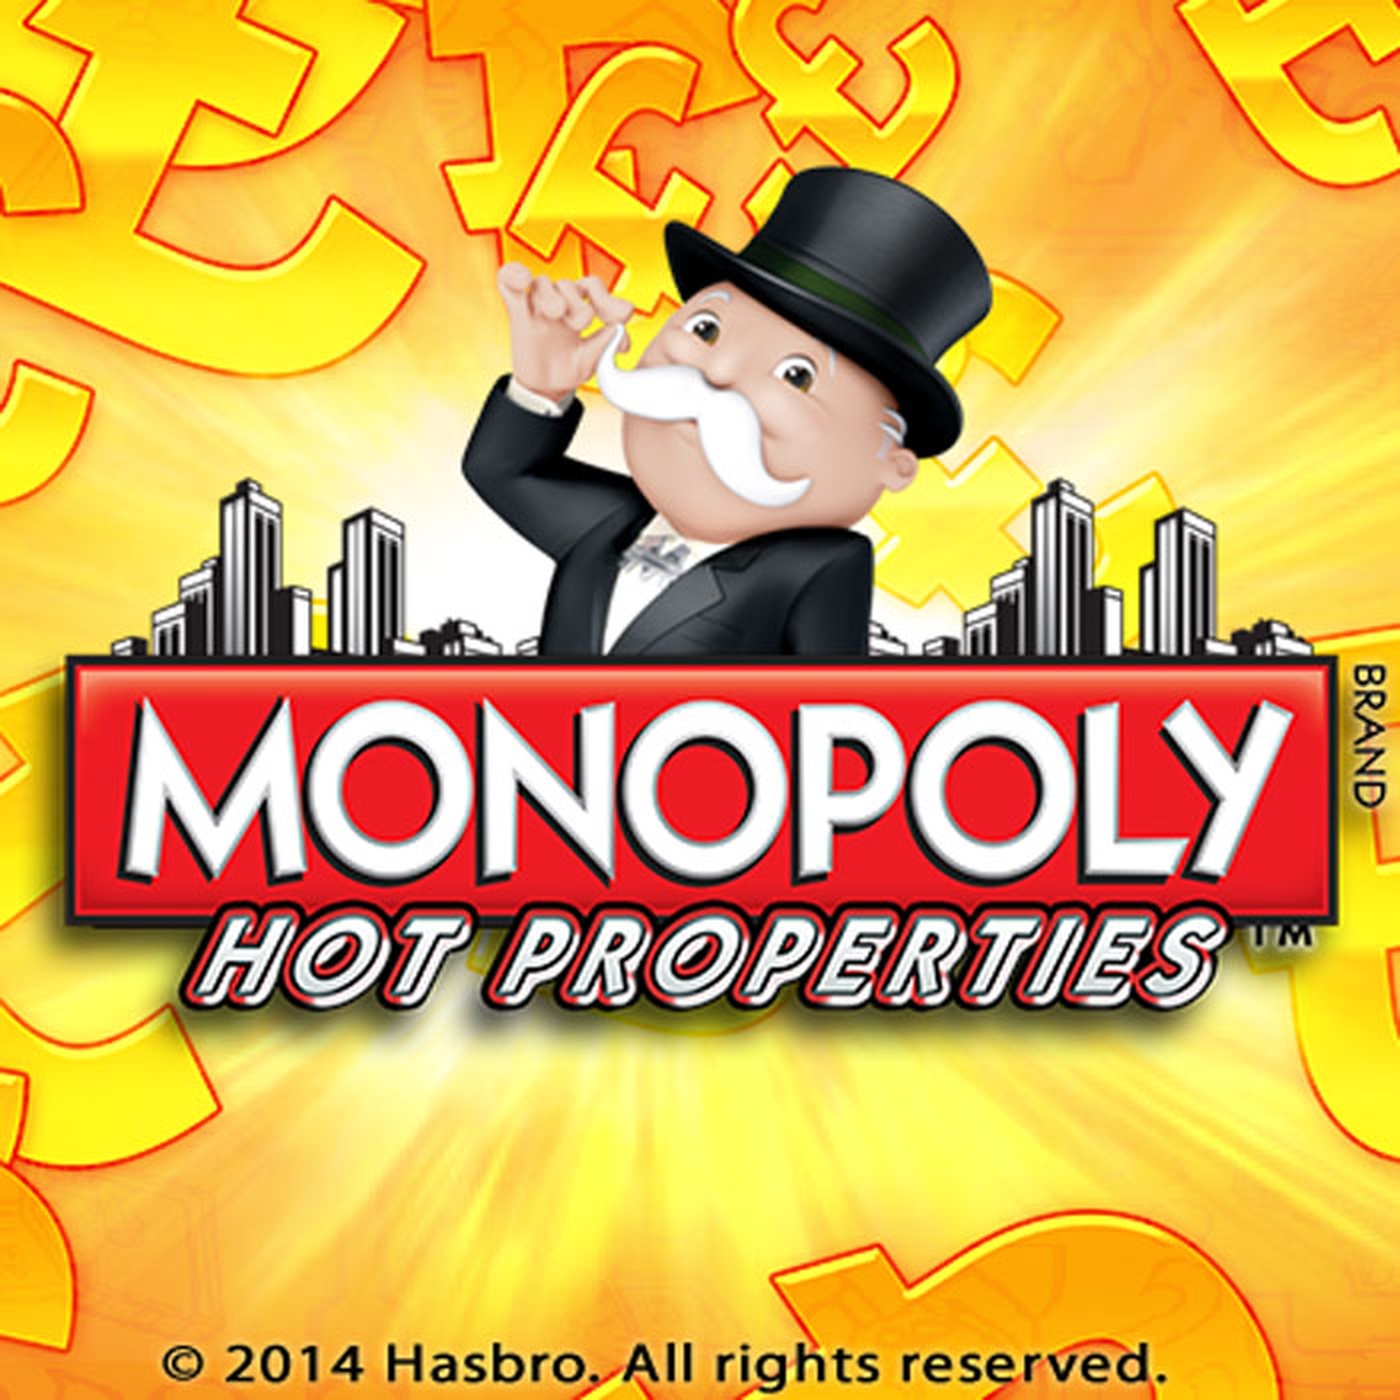 Monopoly Roulette Hot Properties demo